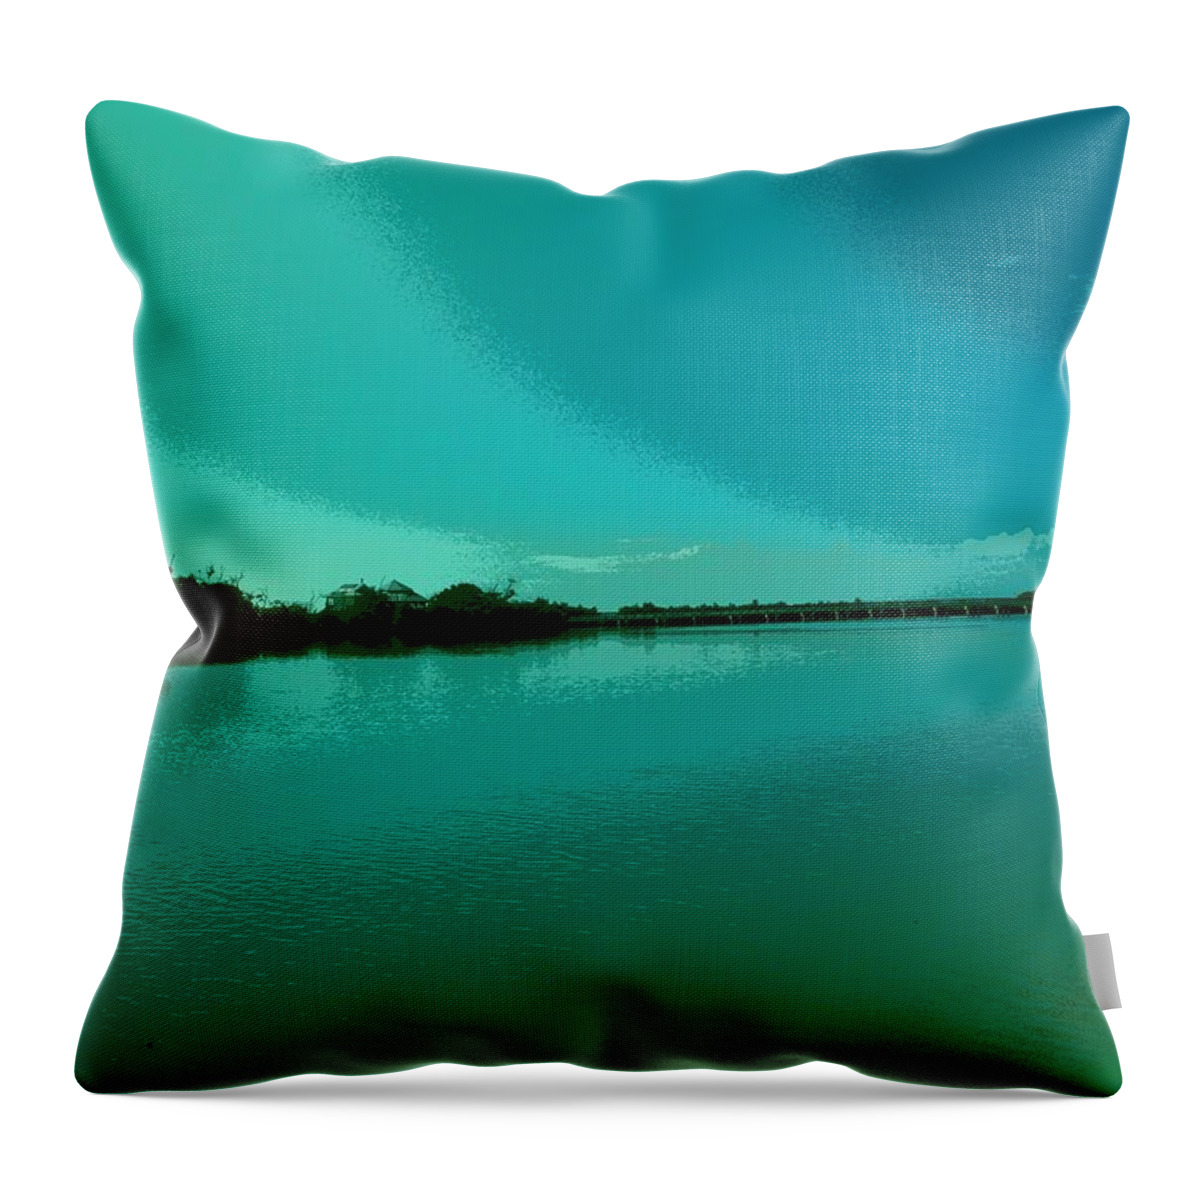 Landscape Throw Pillow featuring the photograph Majestic Skies by Florene Welebny